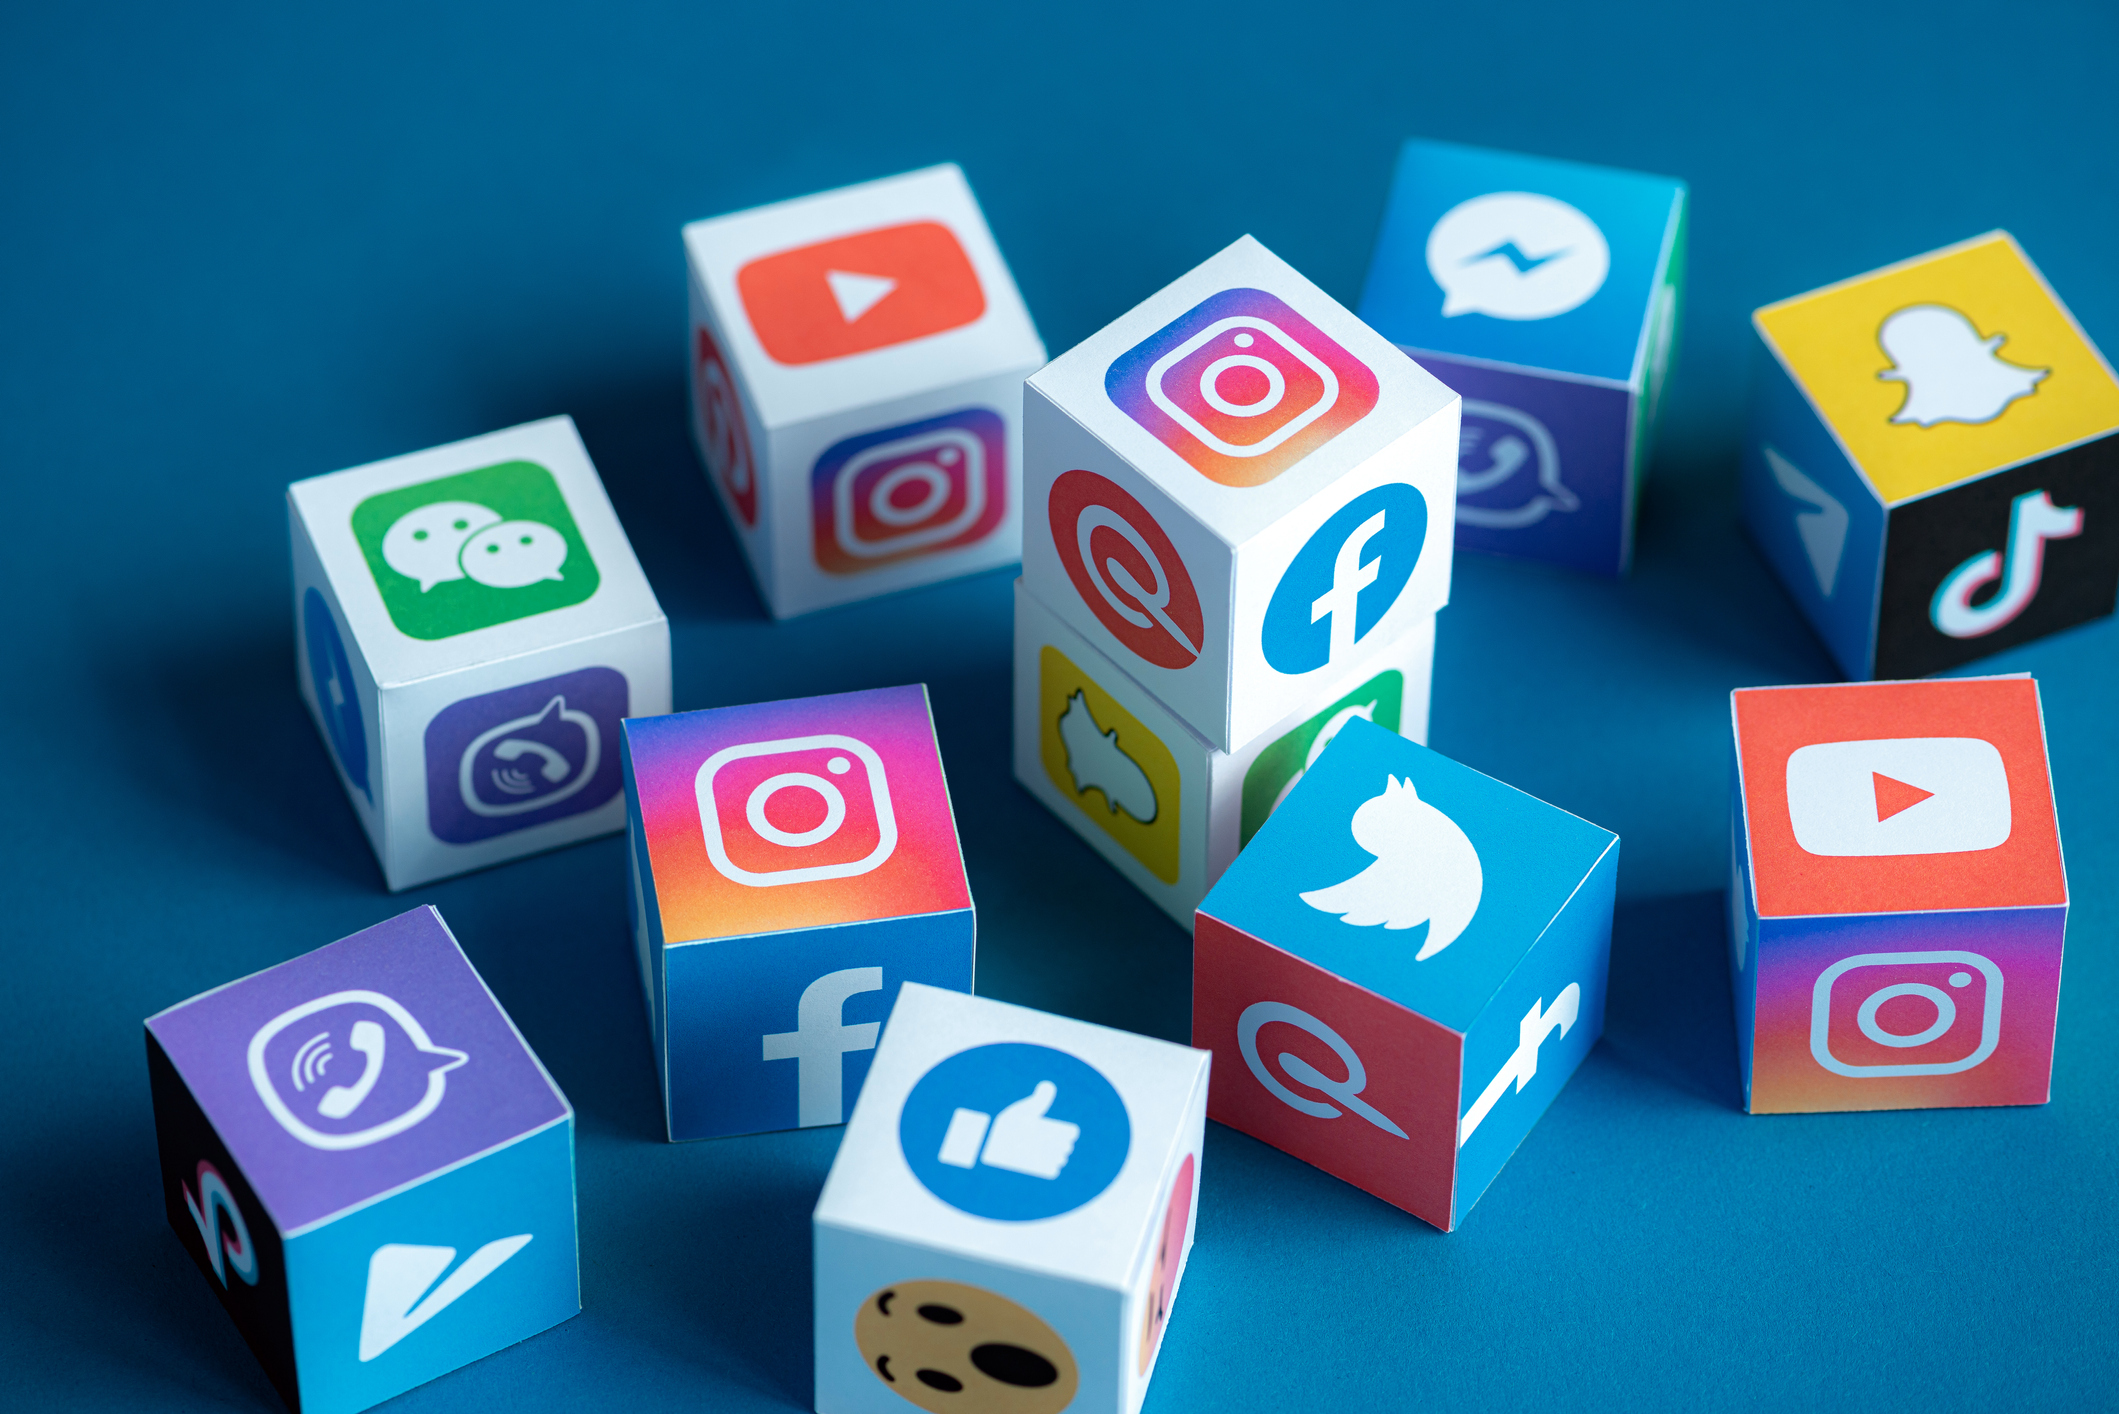 Endless Possibilities For Next Generation Of Social Media Features